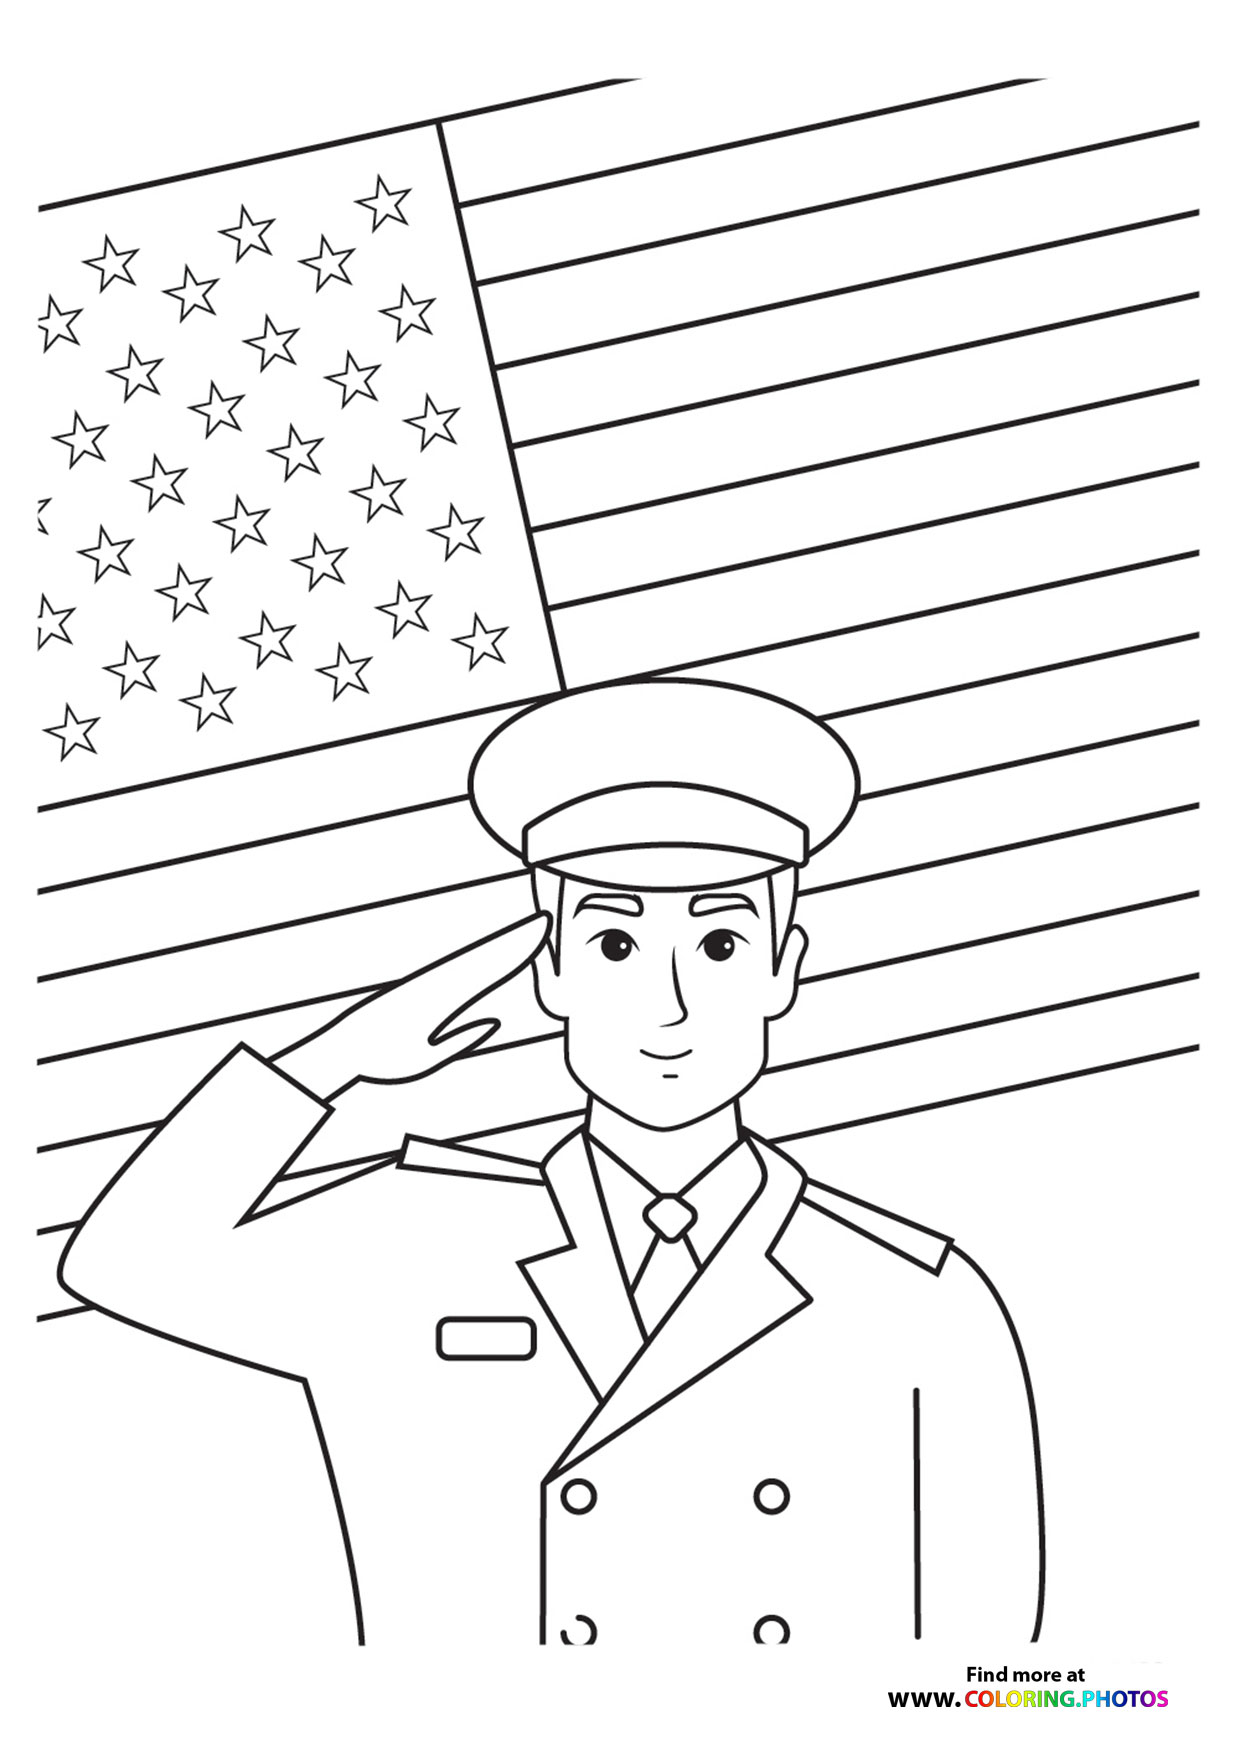 Solider saluting - Coloring Pages for kids